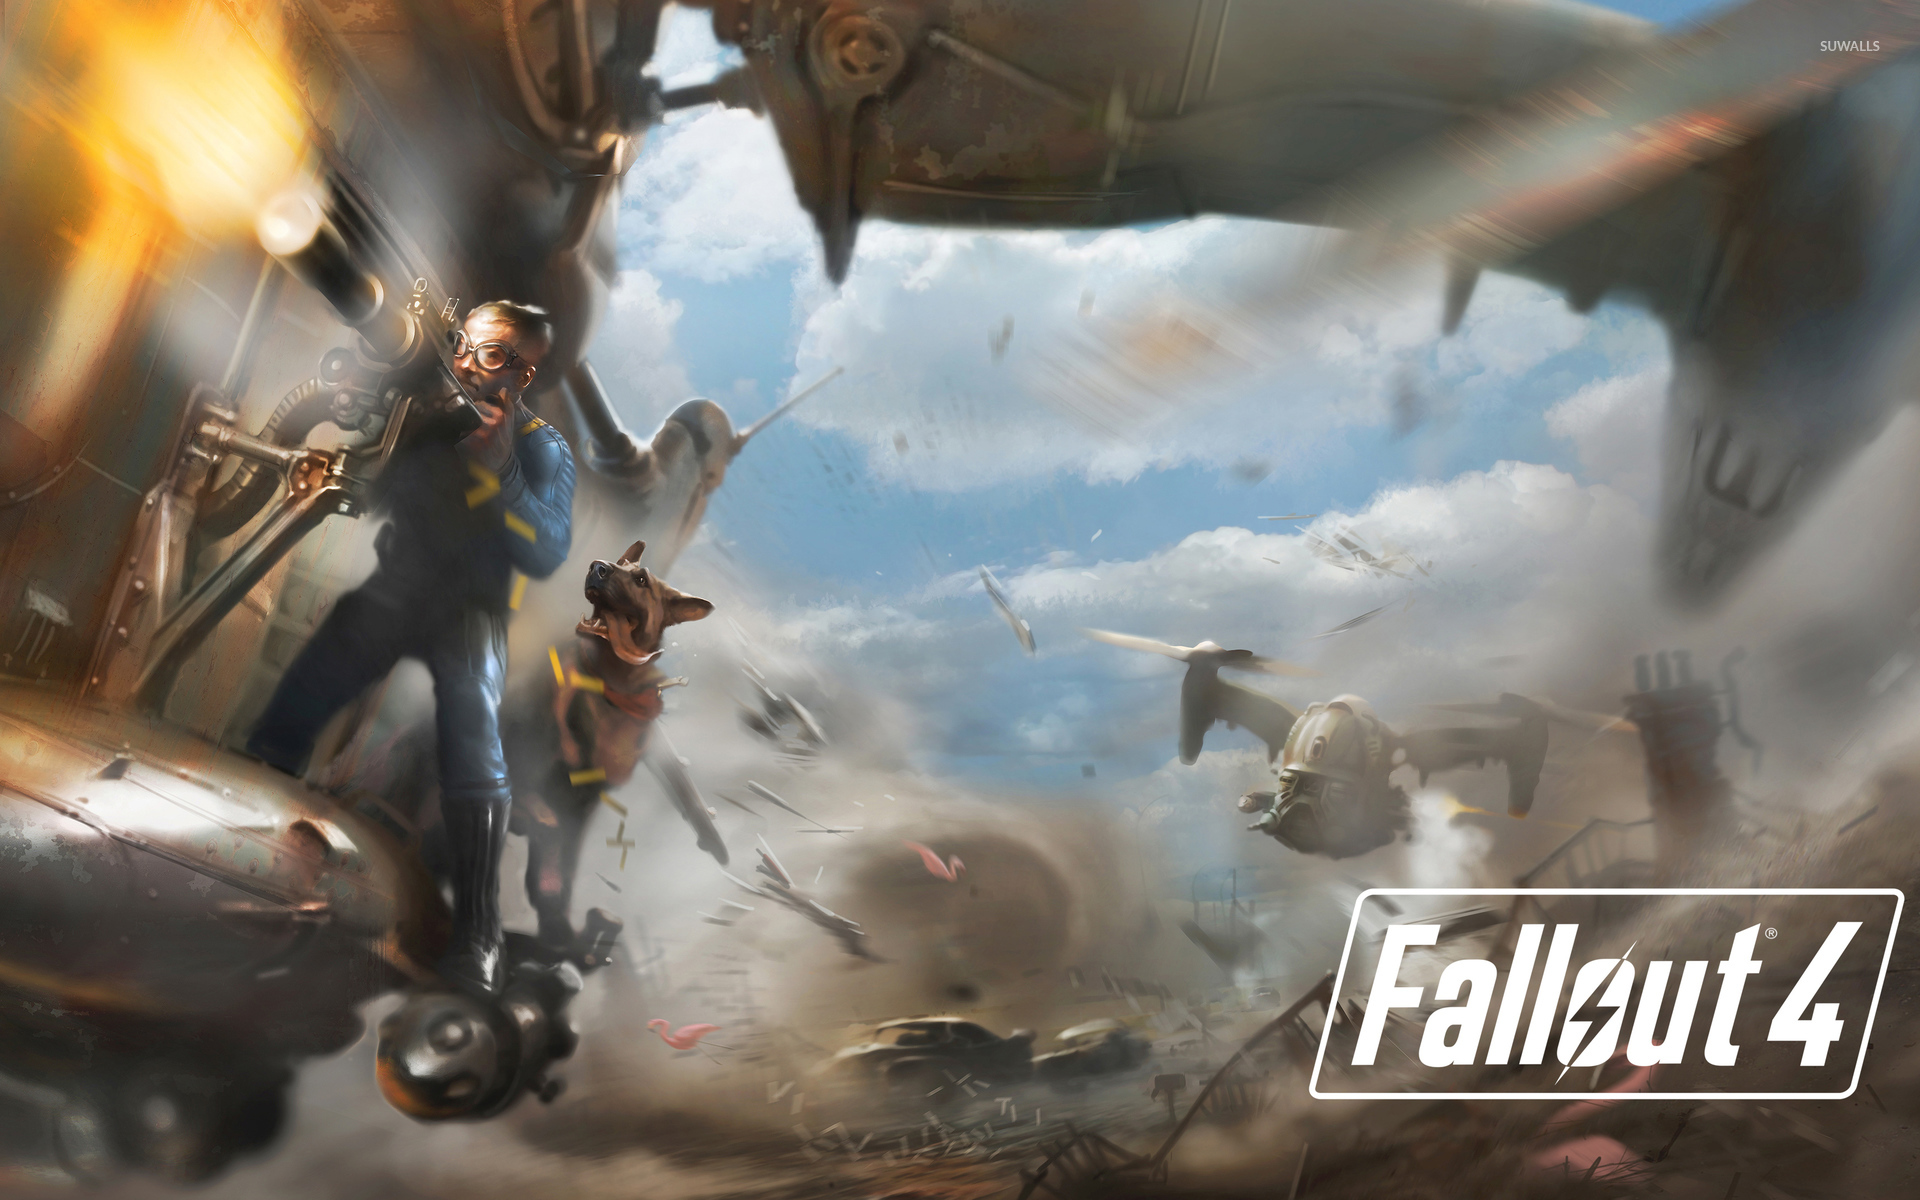 Battle In Fallout Wallpaper Game